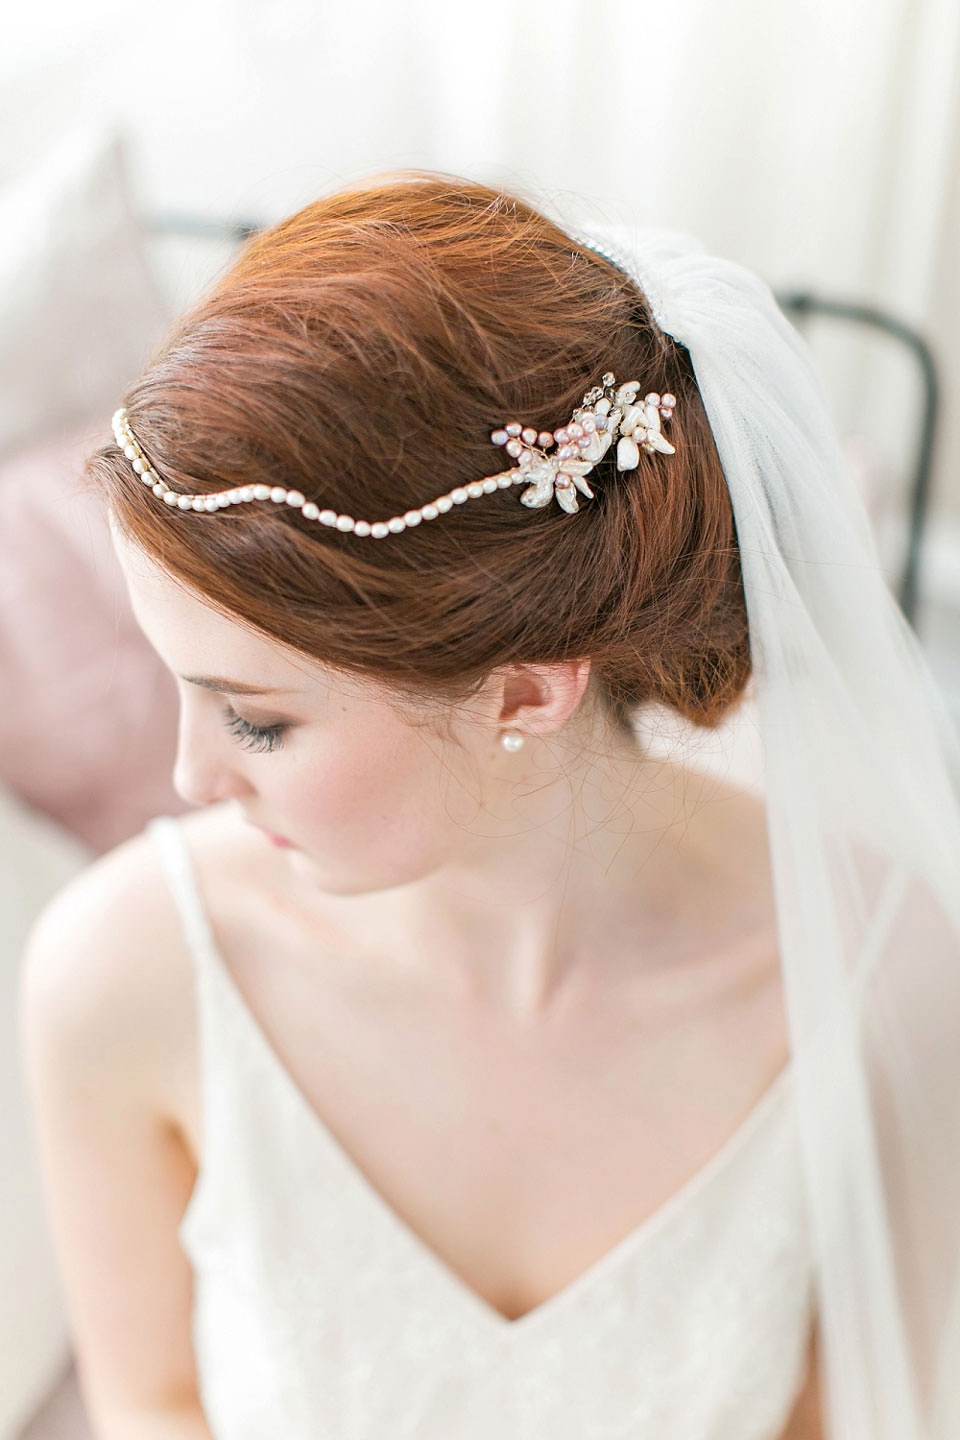 Victoria Millésime bridal accessories - treasured heirloom inspired headpieces for modern day brides.